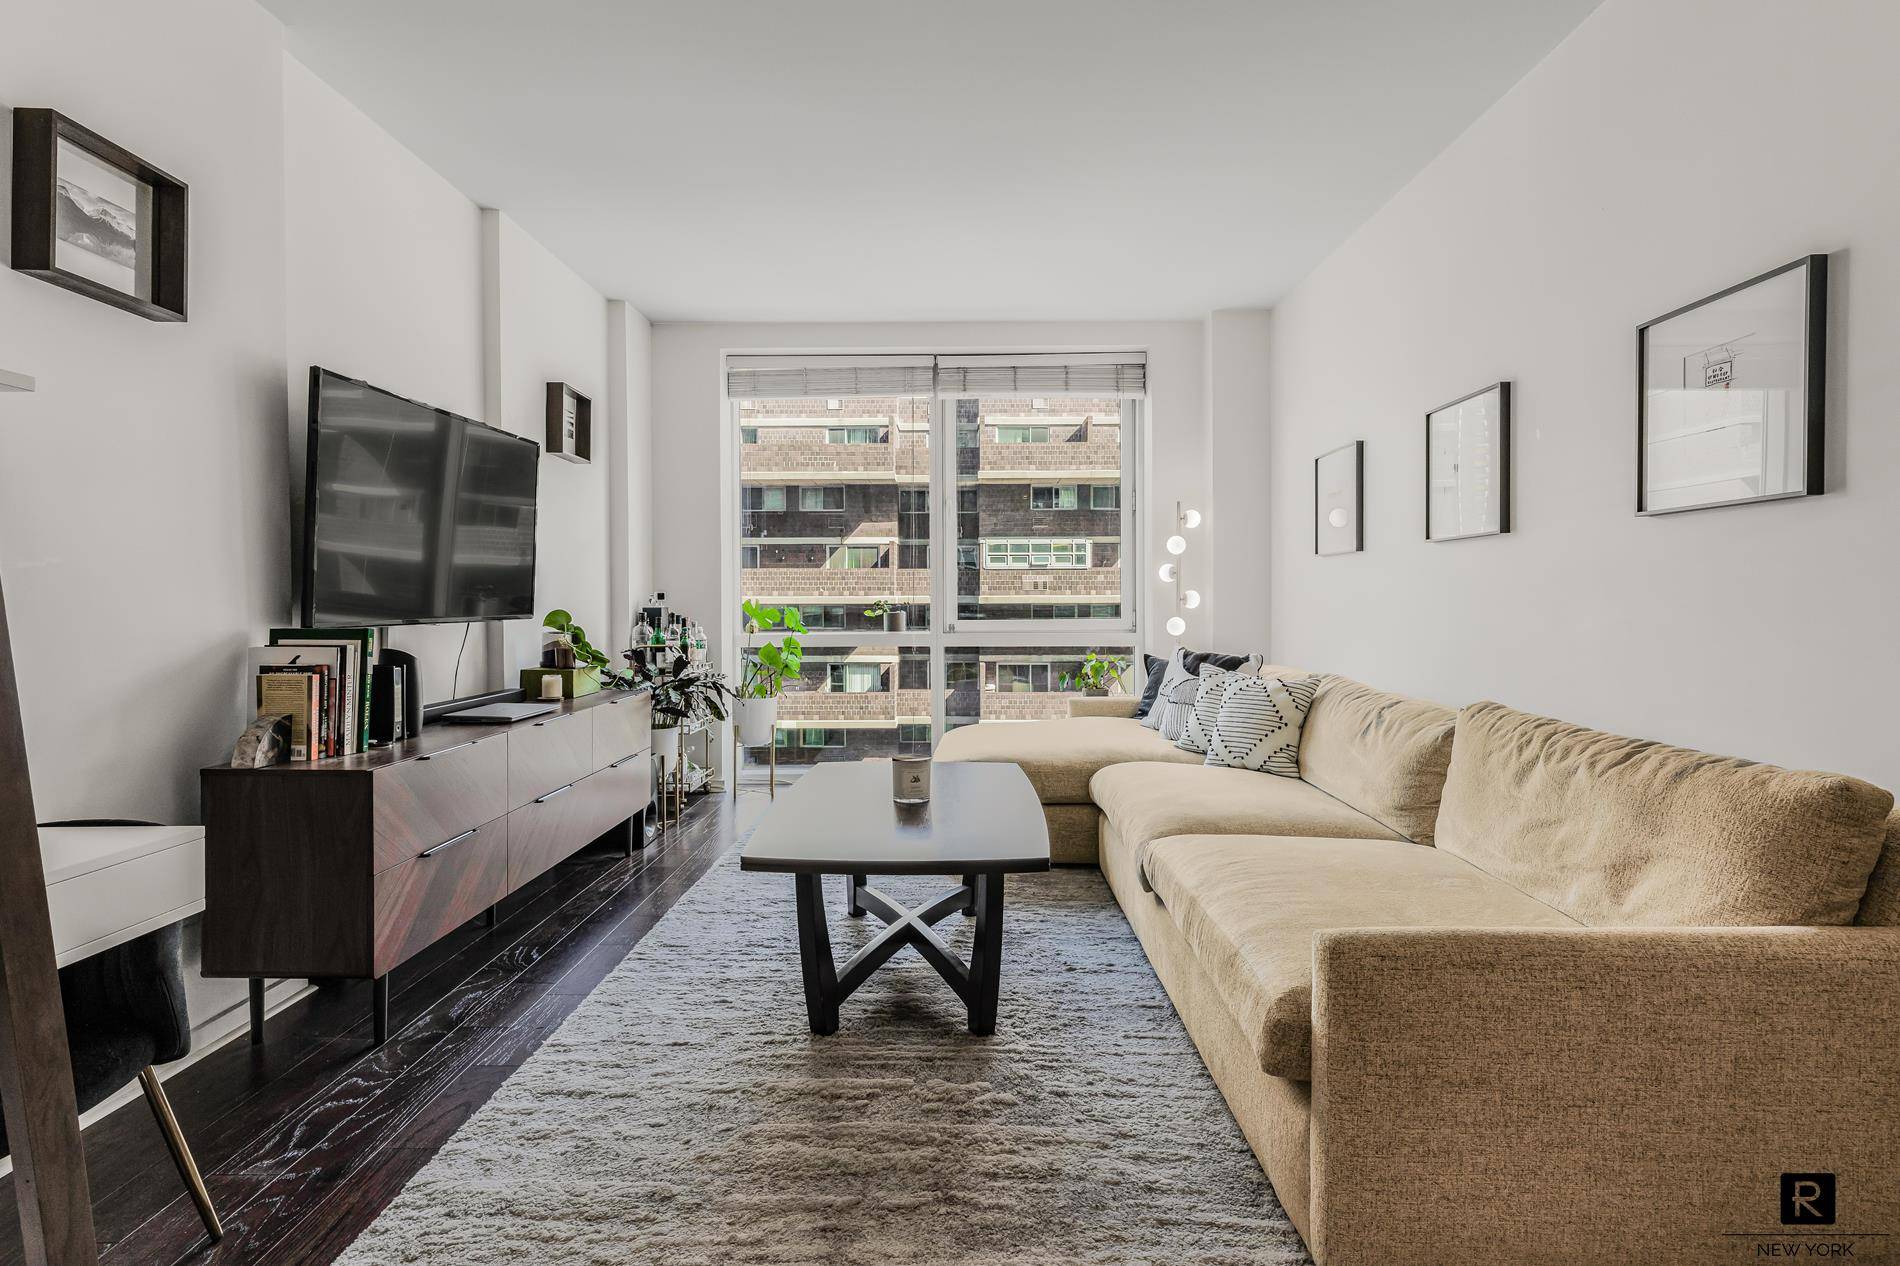 FOR INVESTORS ONLY ! Welcome to Gramercy Starck, a modern, sun filled, well appointed one bedroom conveniently located in one of the best condominiums in Gramercy.